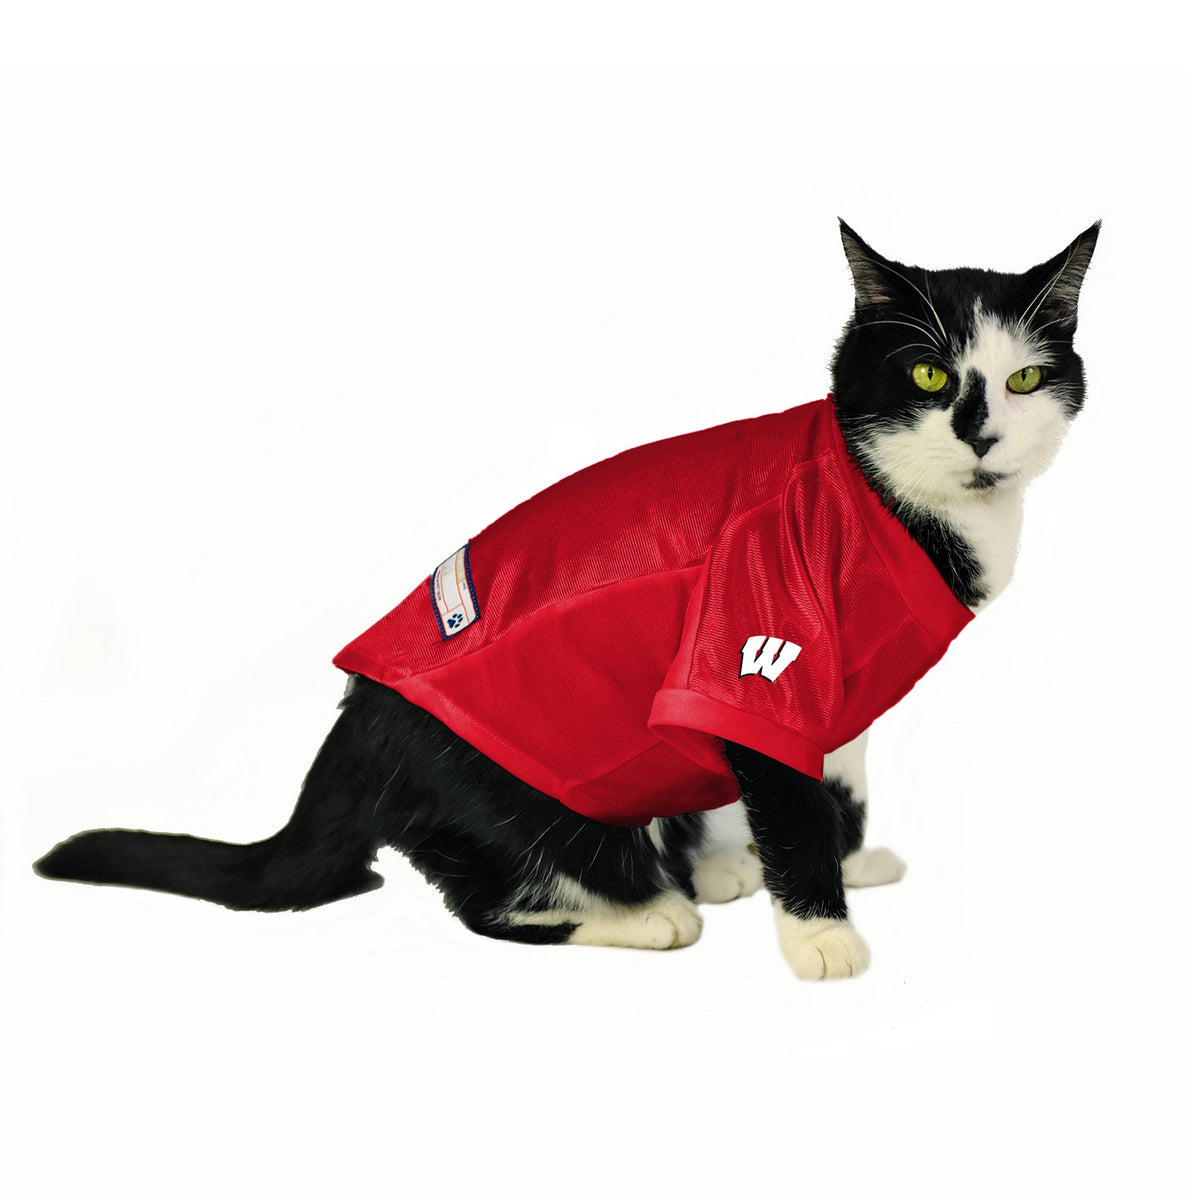 WI Badgers Stretch Jersey - 3 Red Rovers